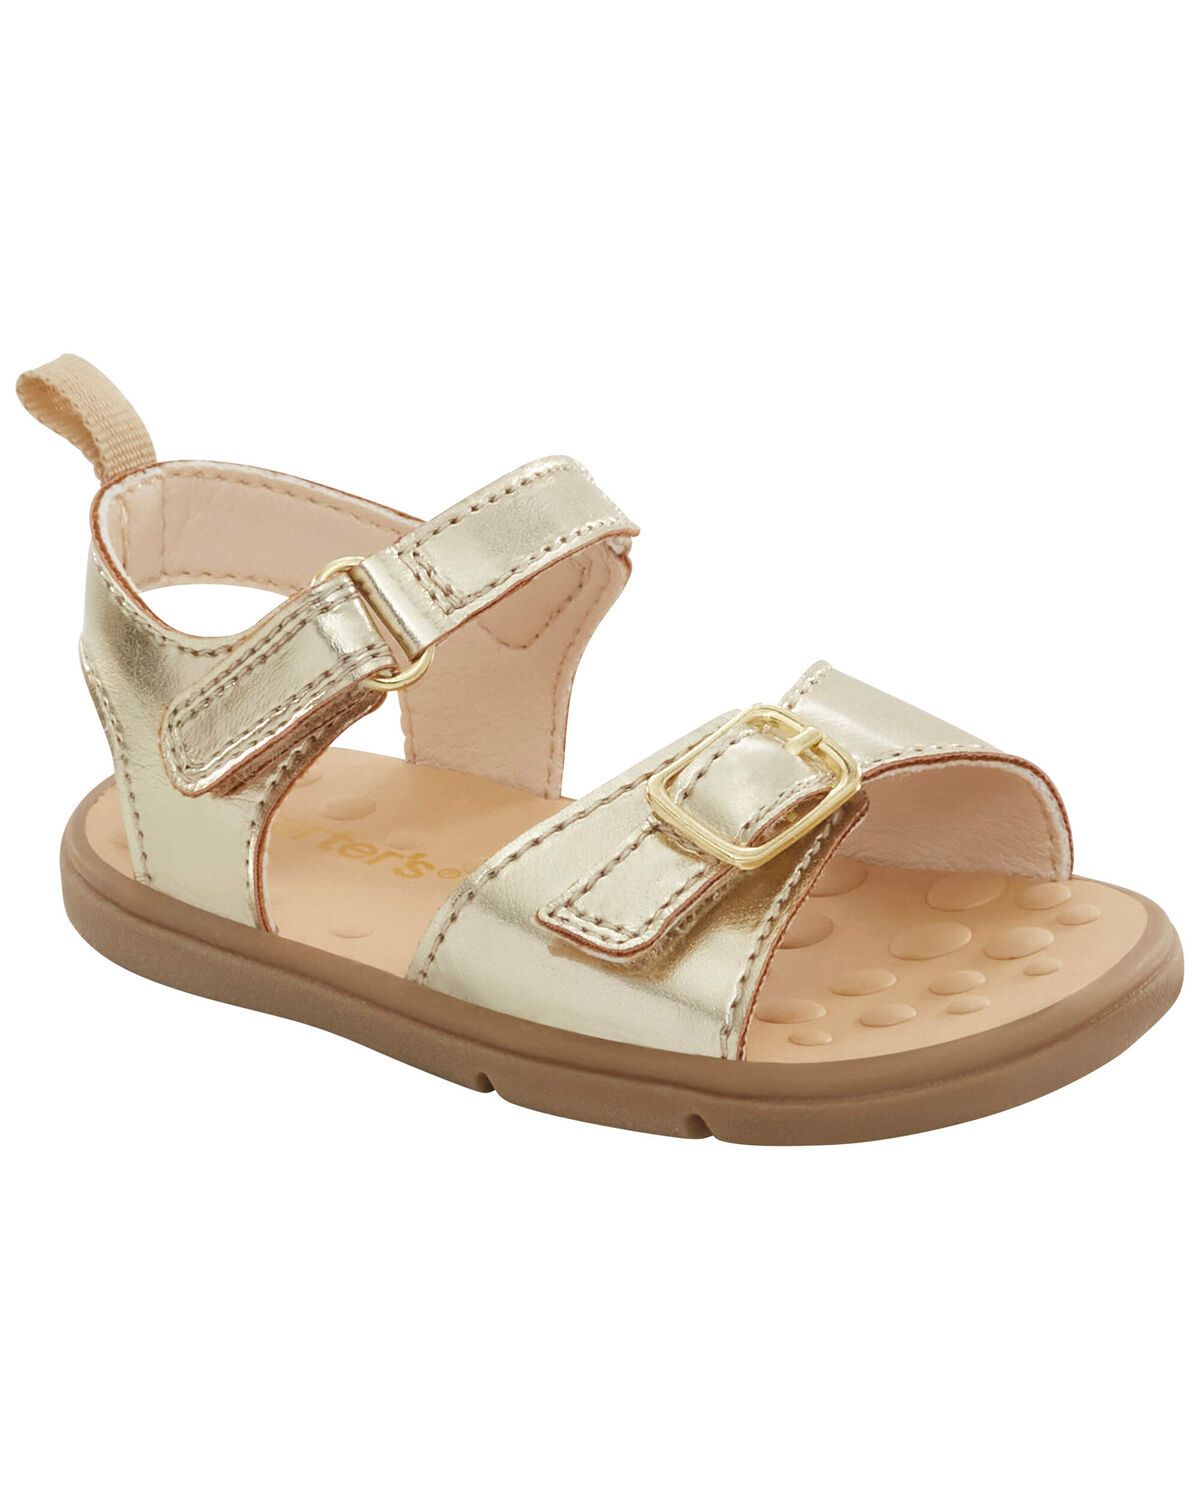 Gold Baby Every Step Gold Sandals | carters.com | Carter's